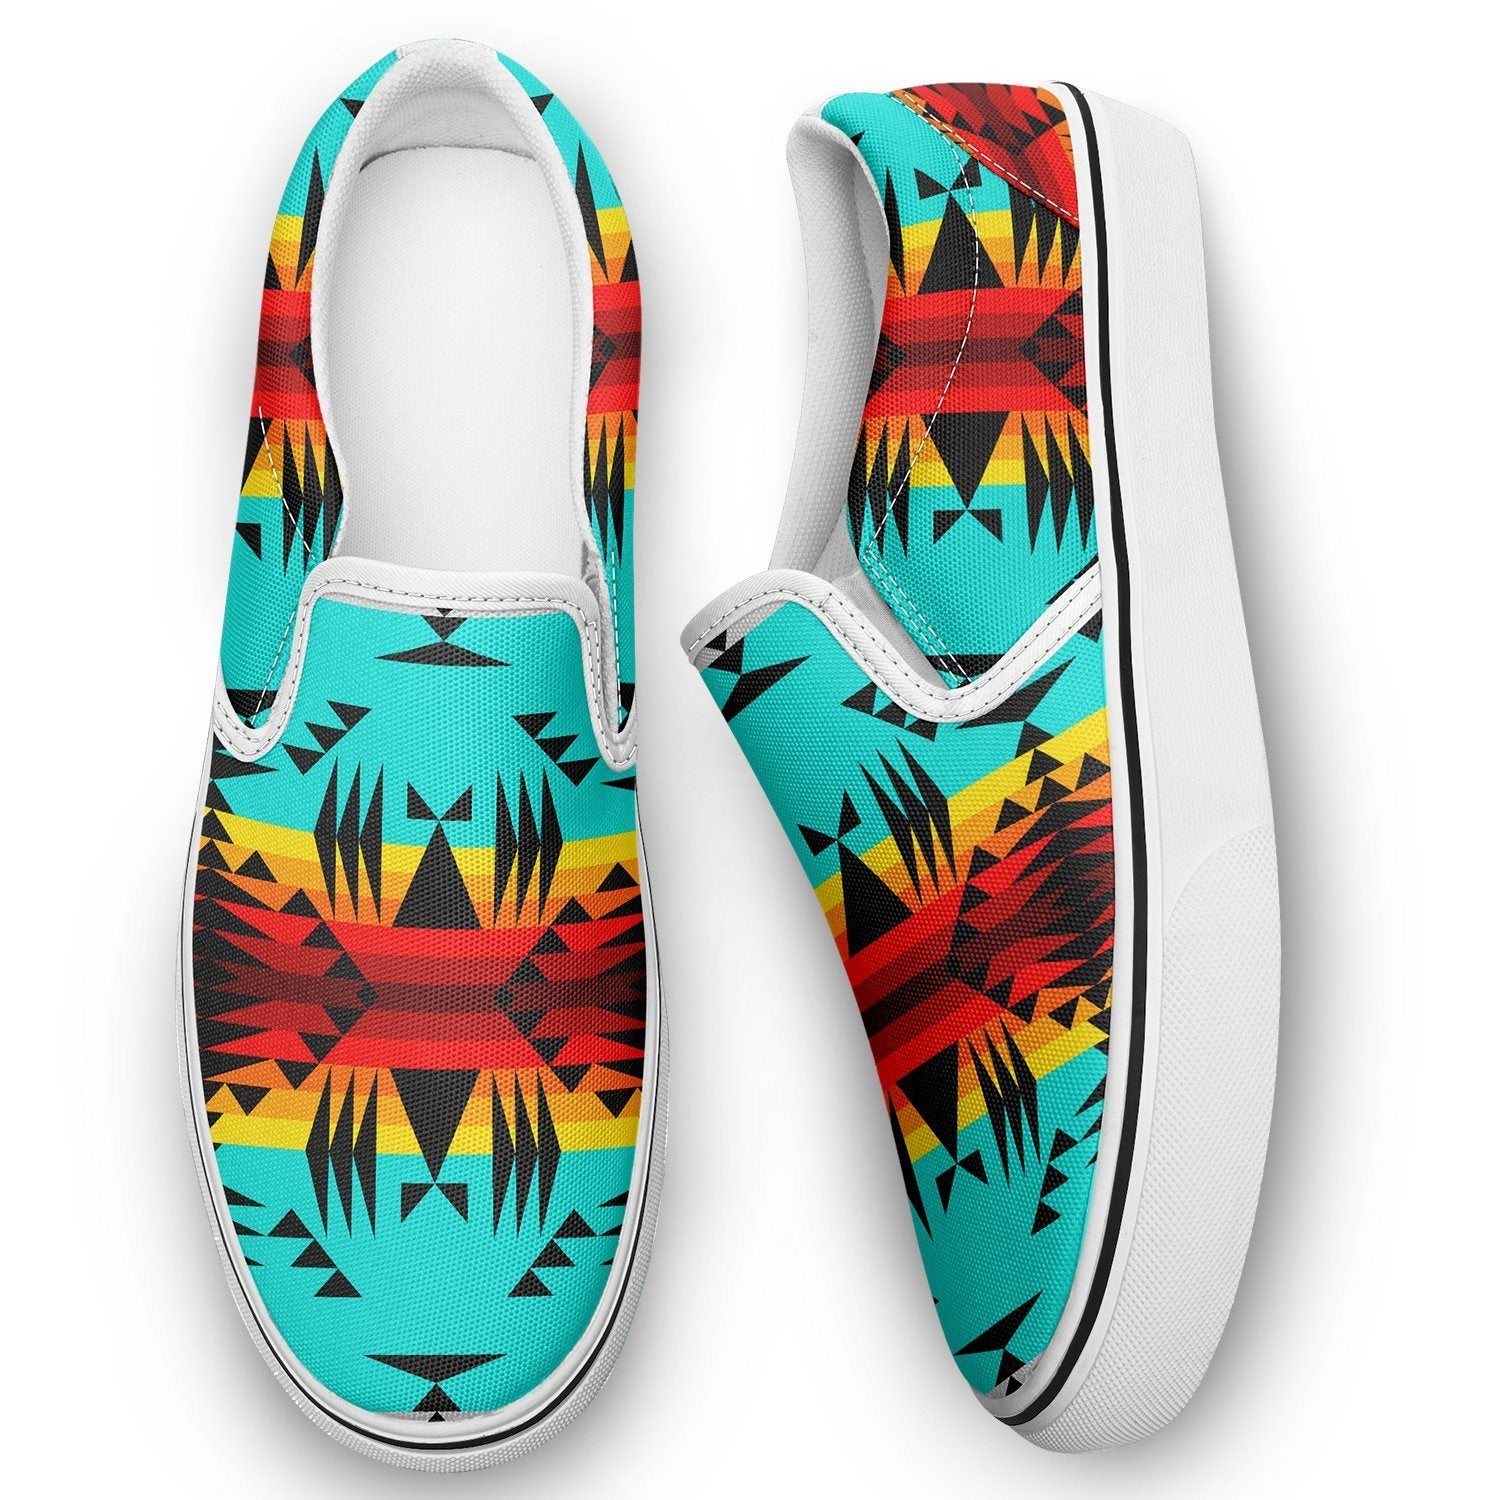 Between the Mountains Otoyimm Kid's Canvas Slip On Shoes 49 Dzine 